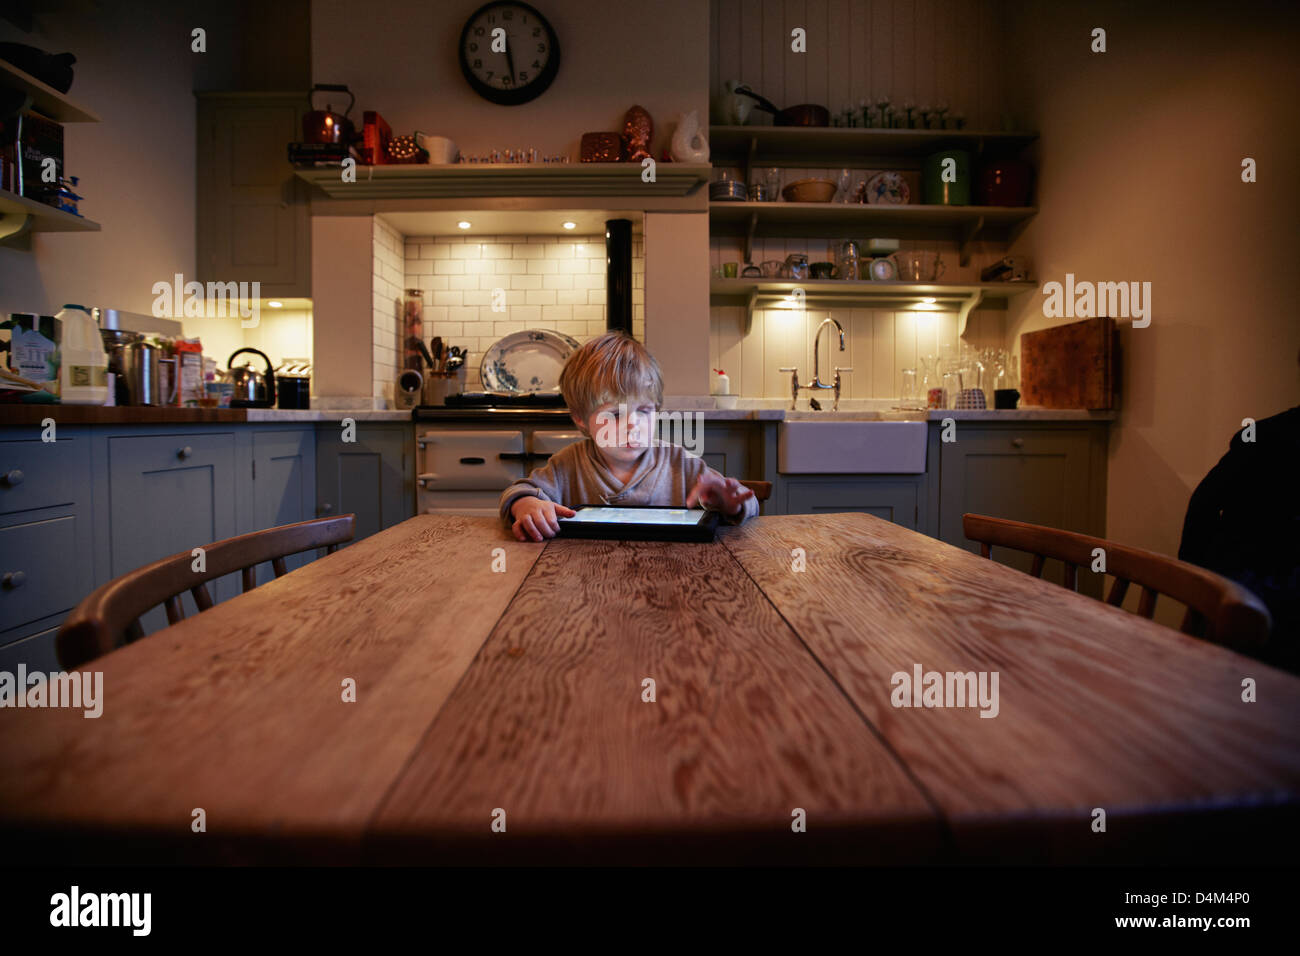 Boy using tablet computer at table Stock Photo